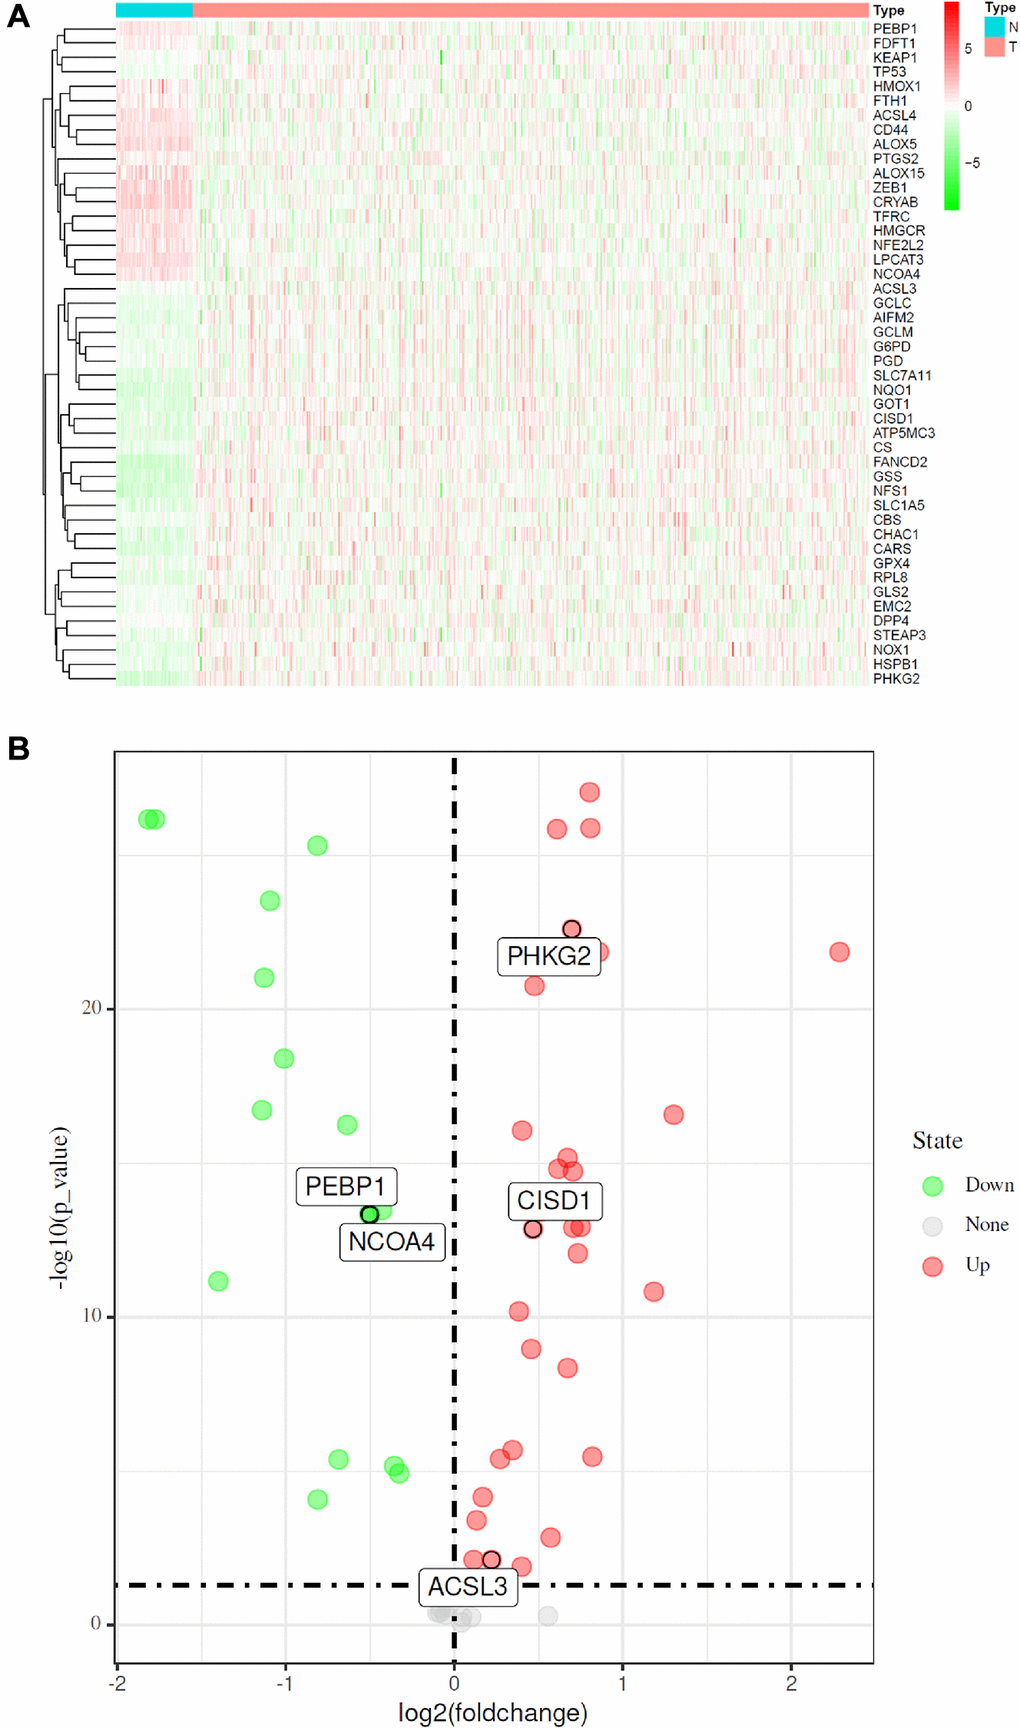 Identification of FRGs in LUAD in the TCGA cohort. (A) Heatmap of differentially expressed FRGs between 510 LUAD tissues and 58 normal adjacent tissues. (B) Volcano plot of the 46 differentially expressed FRGs identified in LUAD. The red and green points in the plot represent upregulated and downregulated FRGs, respectively.